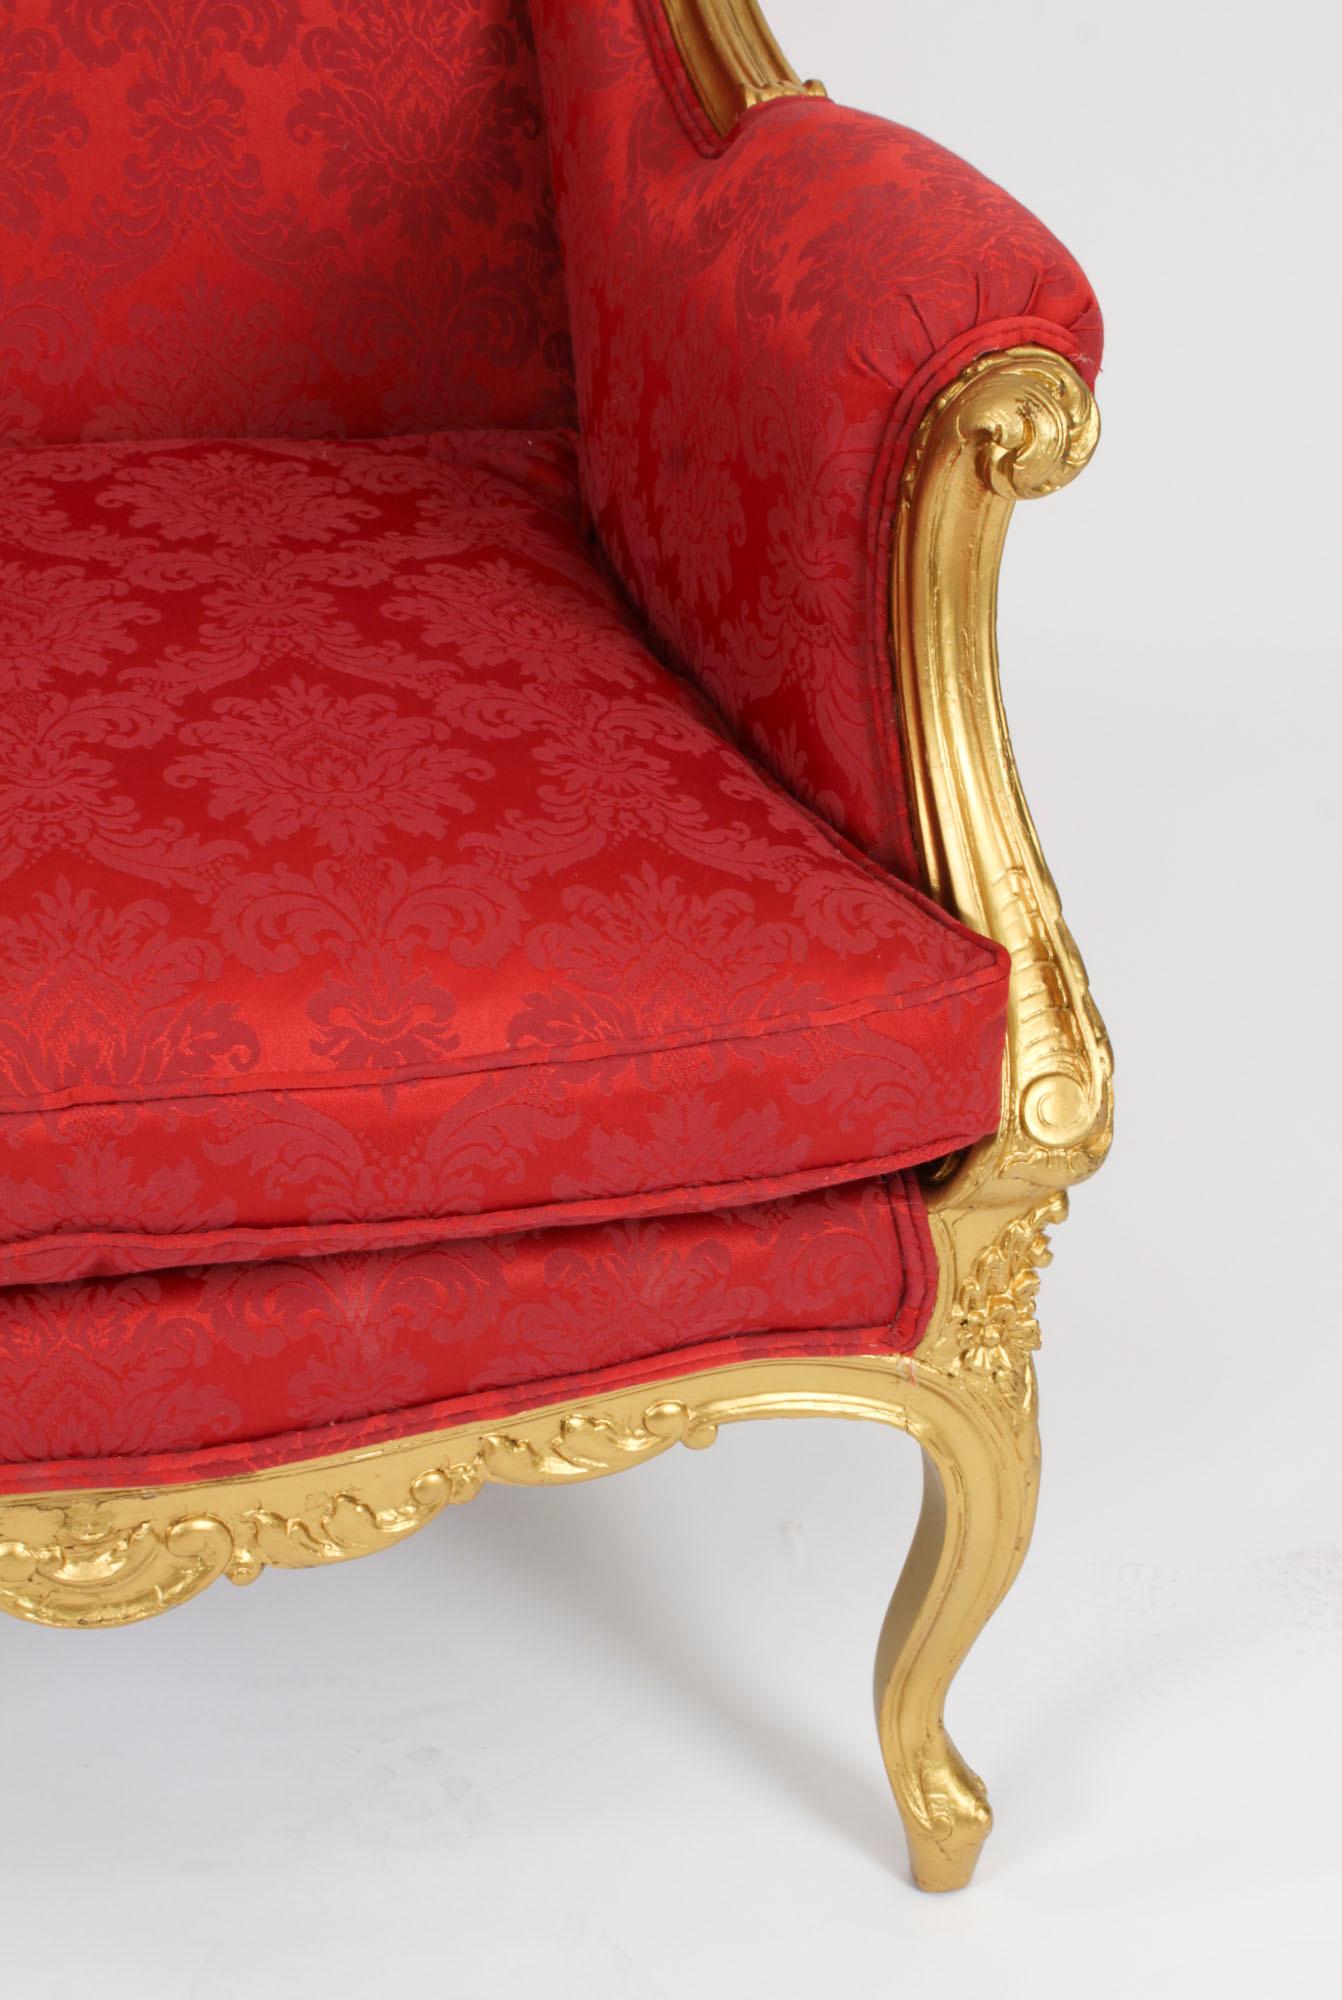 Antique Louis XV Revival Giltwood Shaped Bergere Armchair, 19th Century For Sale 3